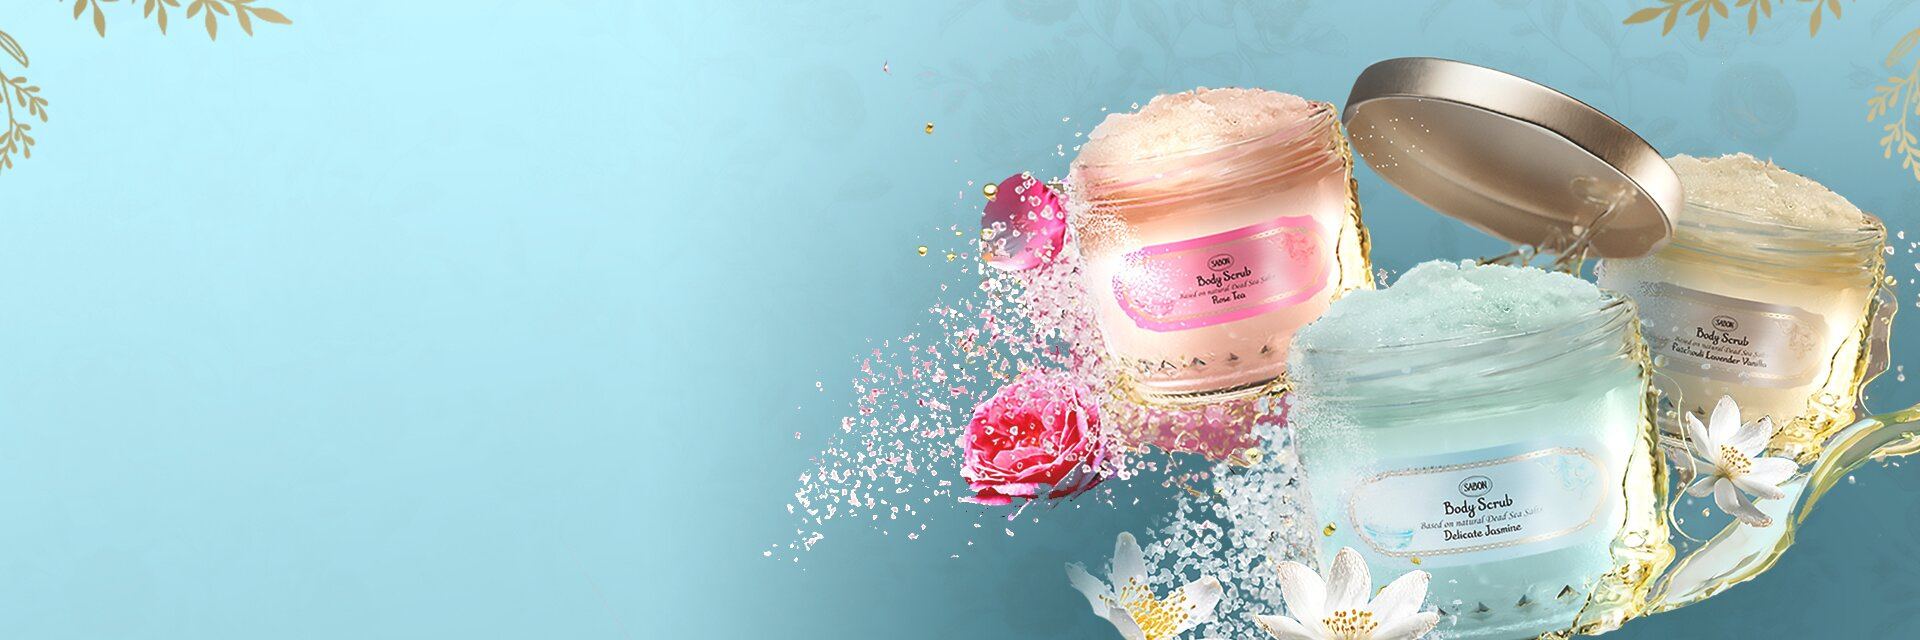 The ONE for my new skin: Loved by everyone, now they will surprise you with 
additional exfoliating and nourishing benefits!